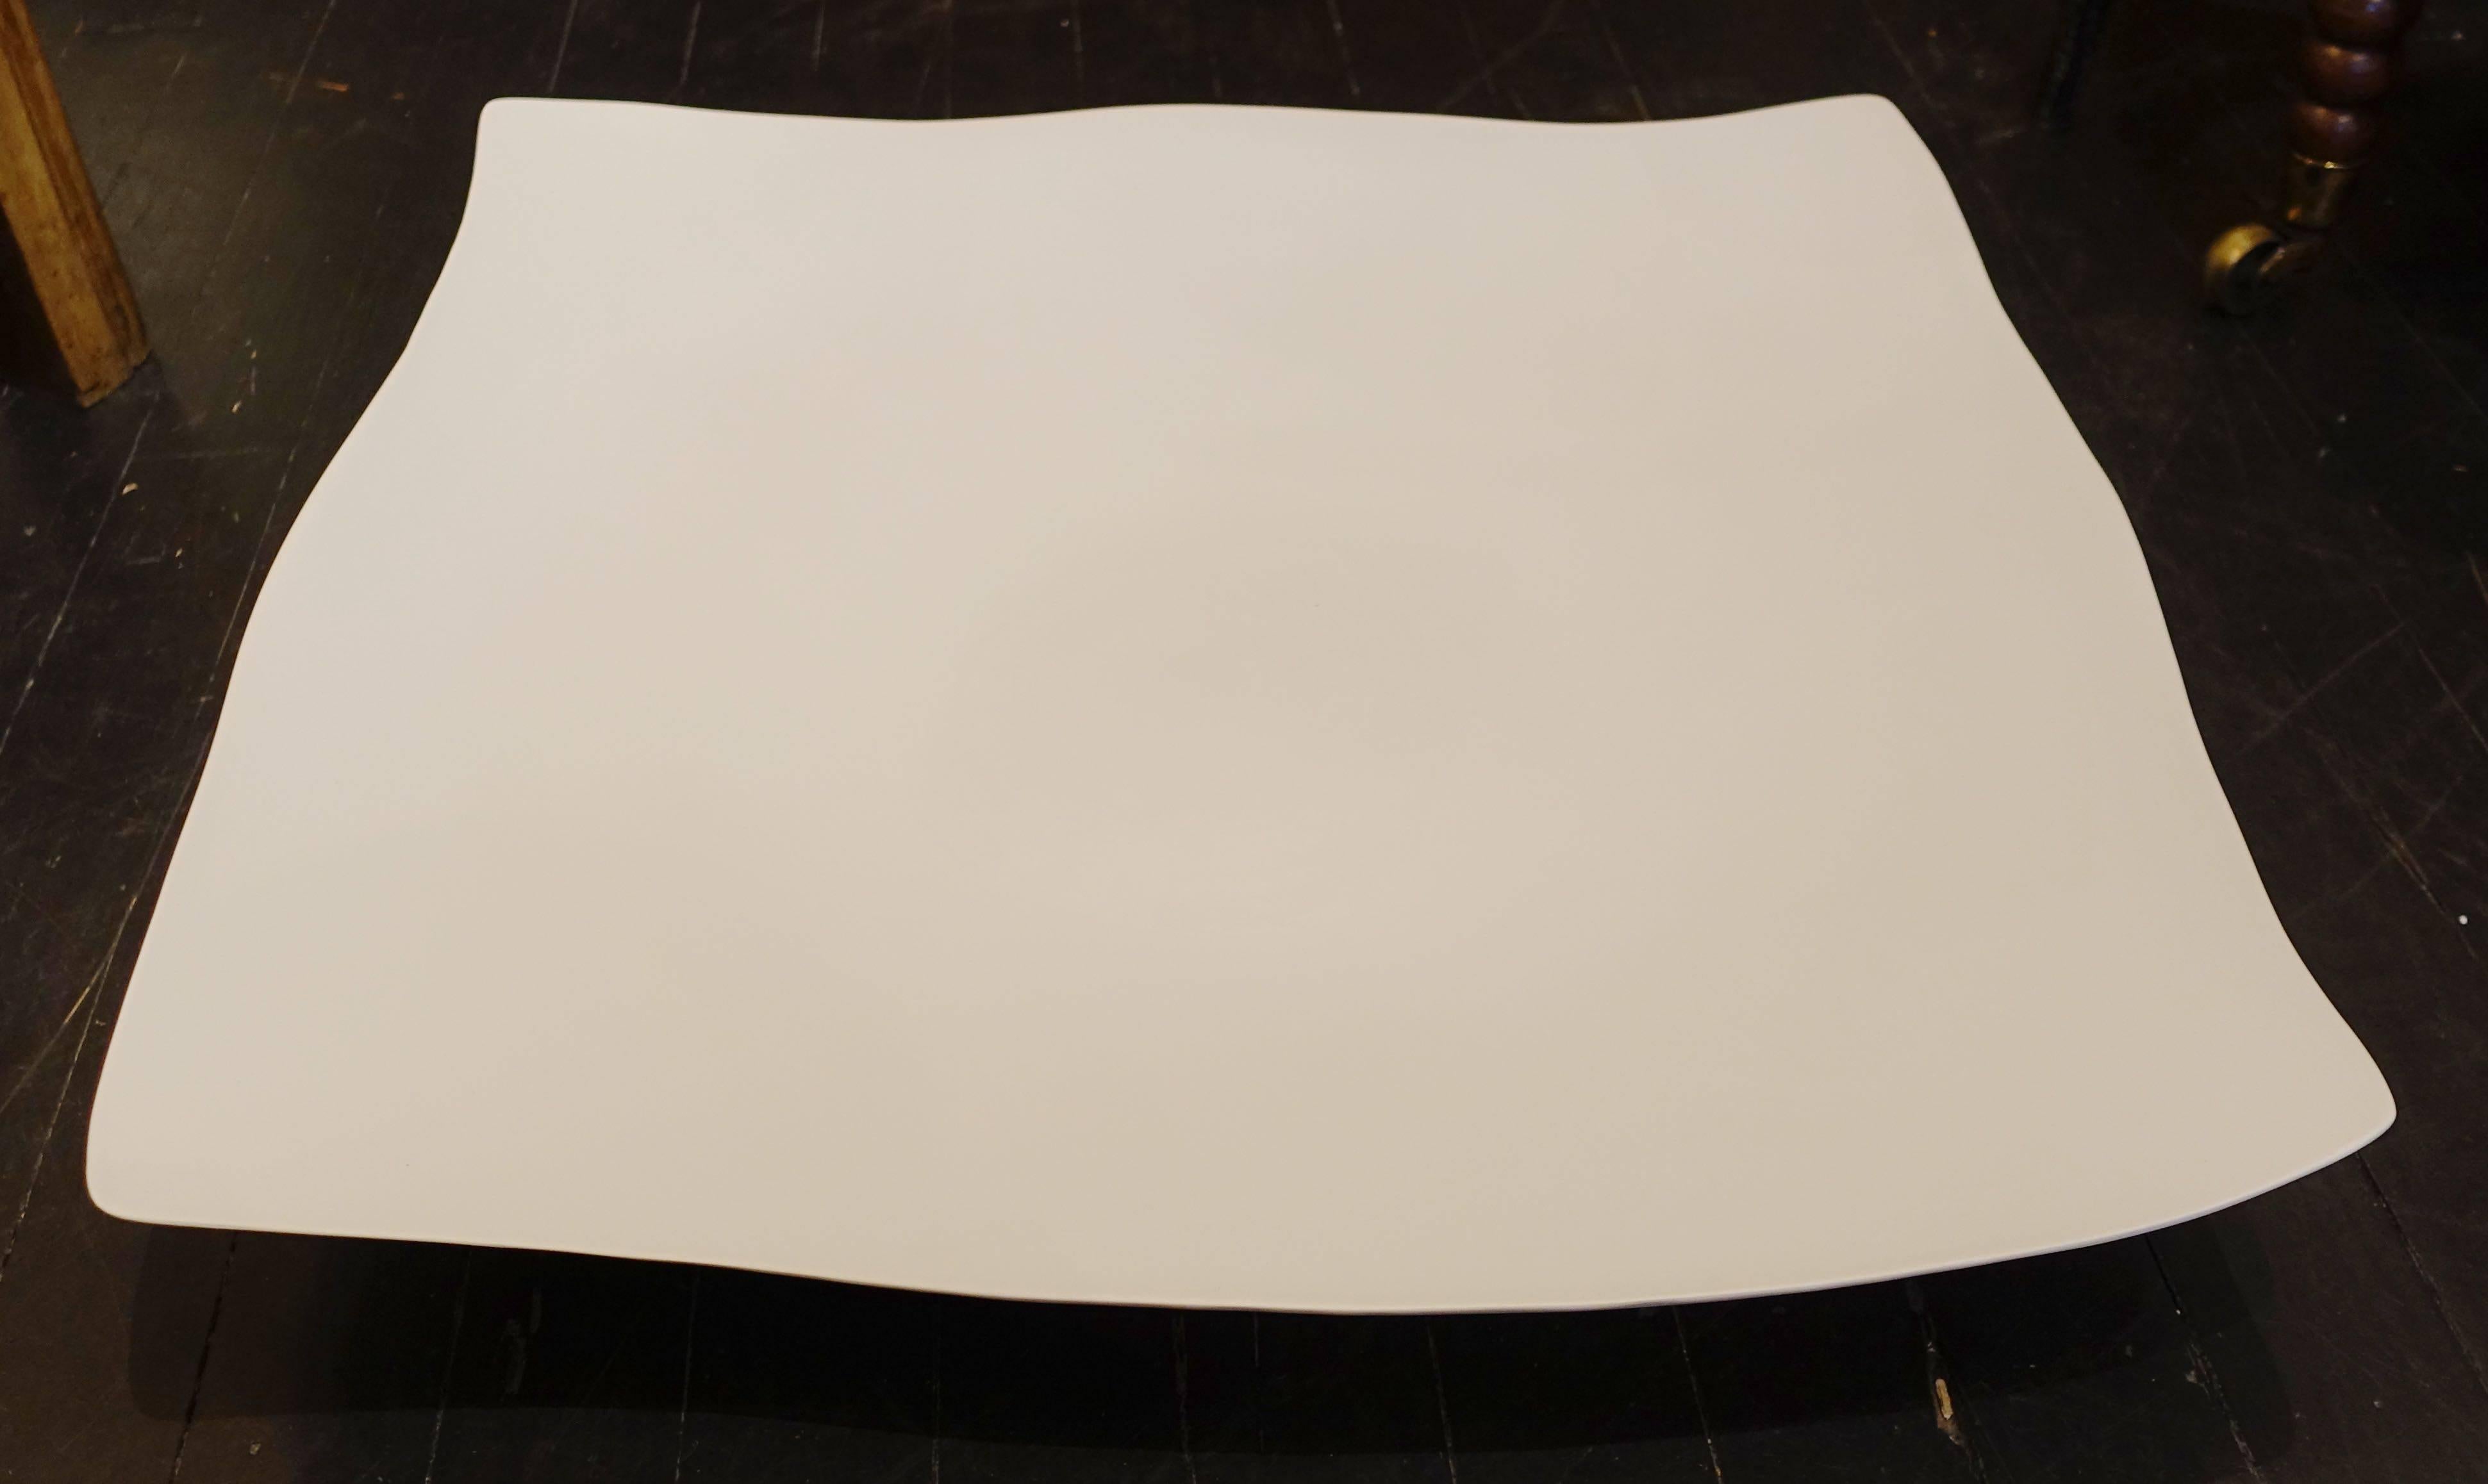 Contemporary Italian handcrafted fine ceramic extra large platter.
Square white organically shaped edges.